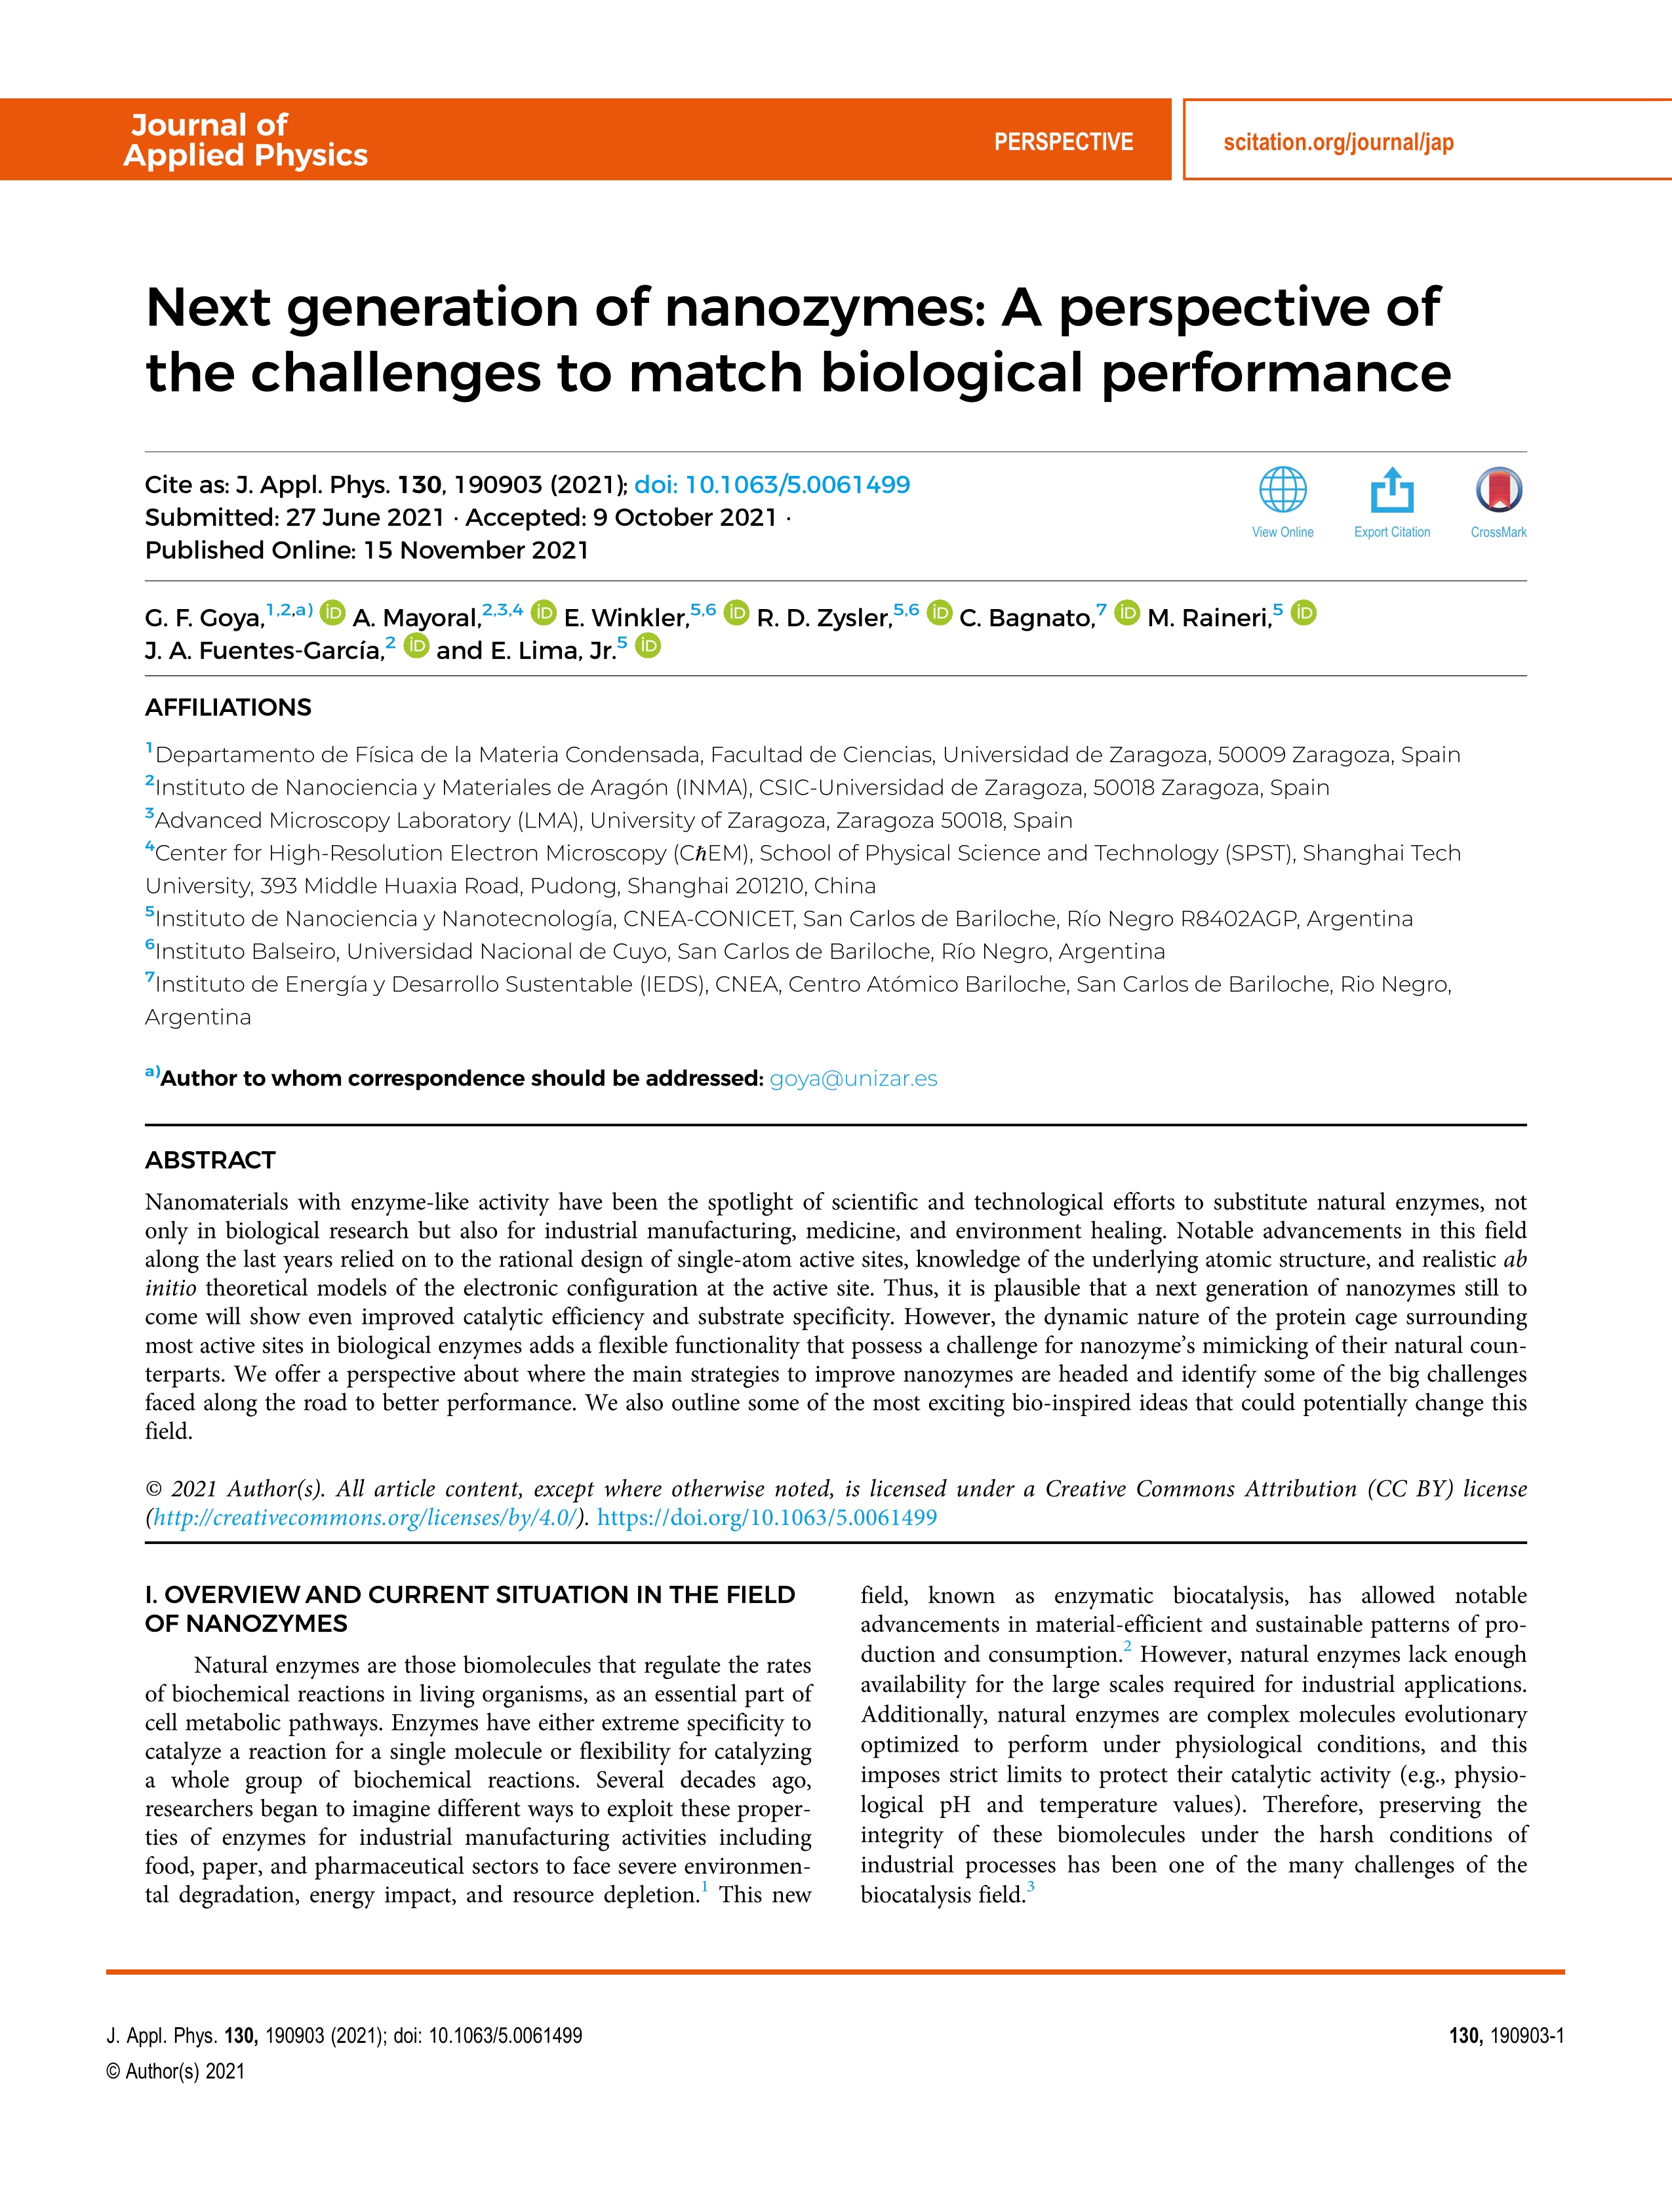 Publisher’s Note: “Next generation of nanozymes: A perspective of the challenges to match biological performance” [J. Appl. Phys. 130, 190903 (2021)]